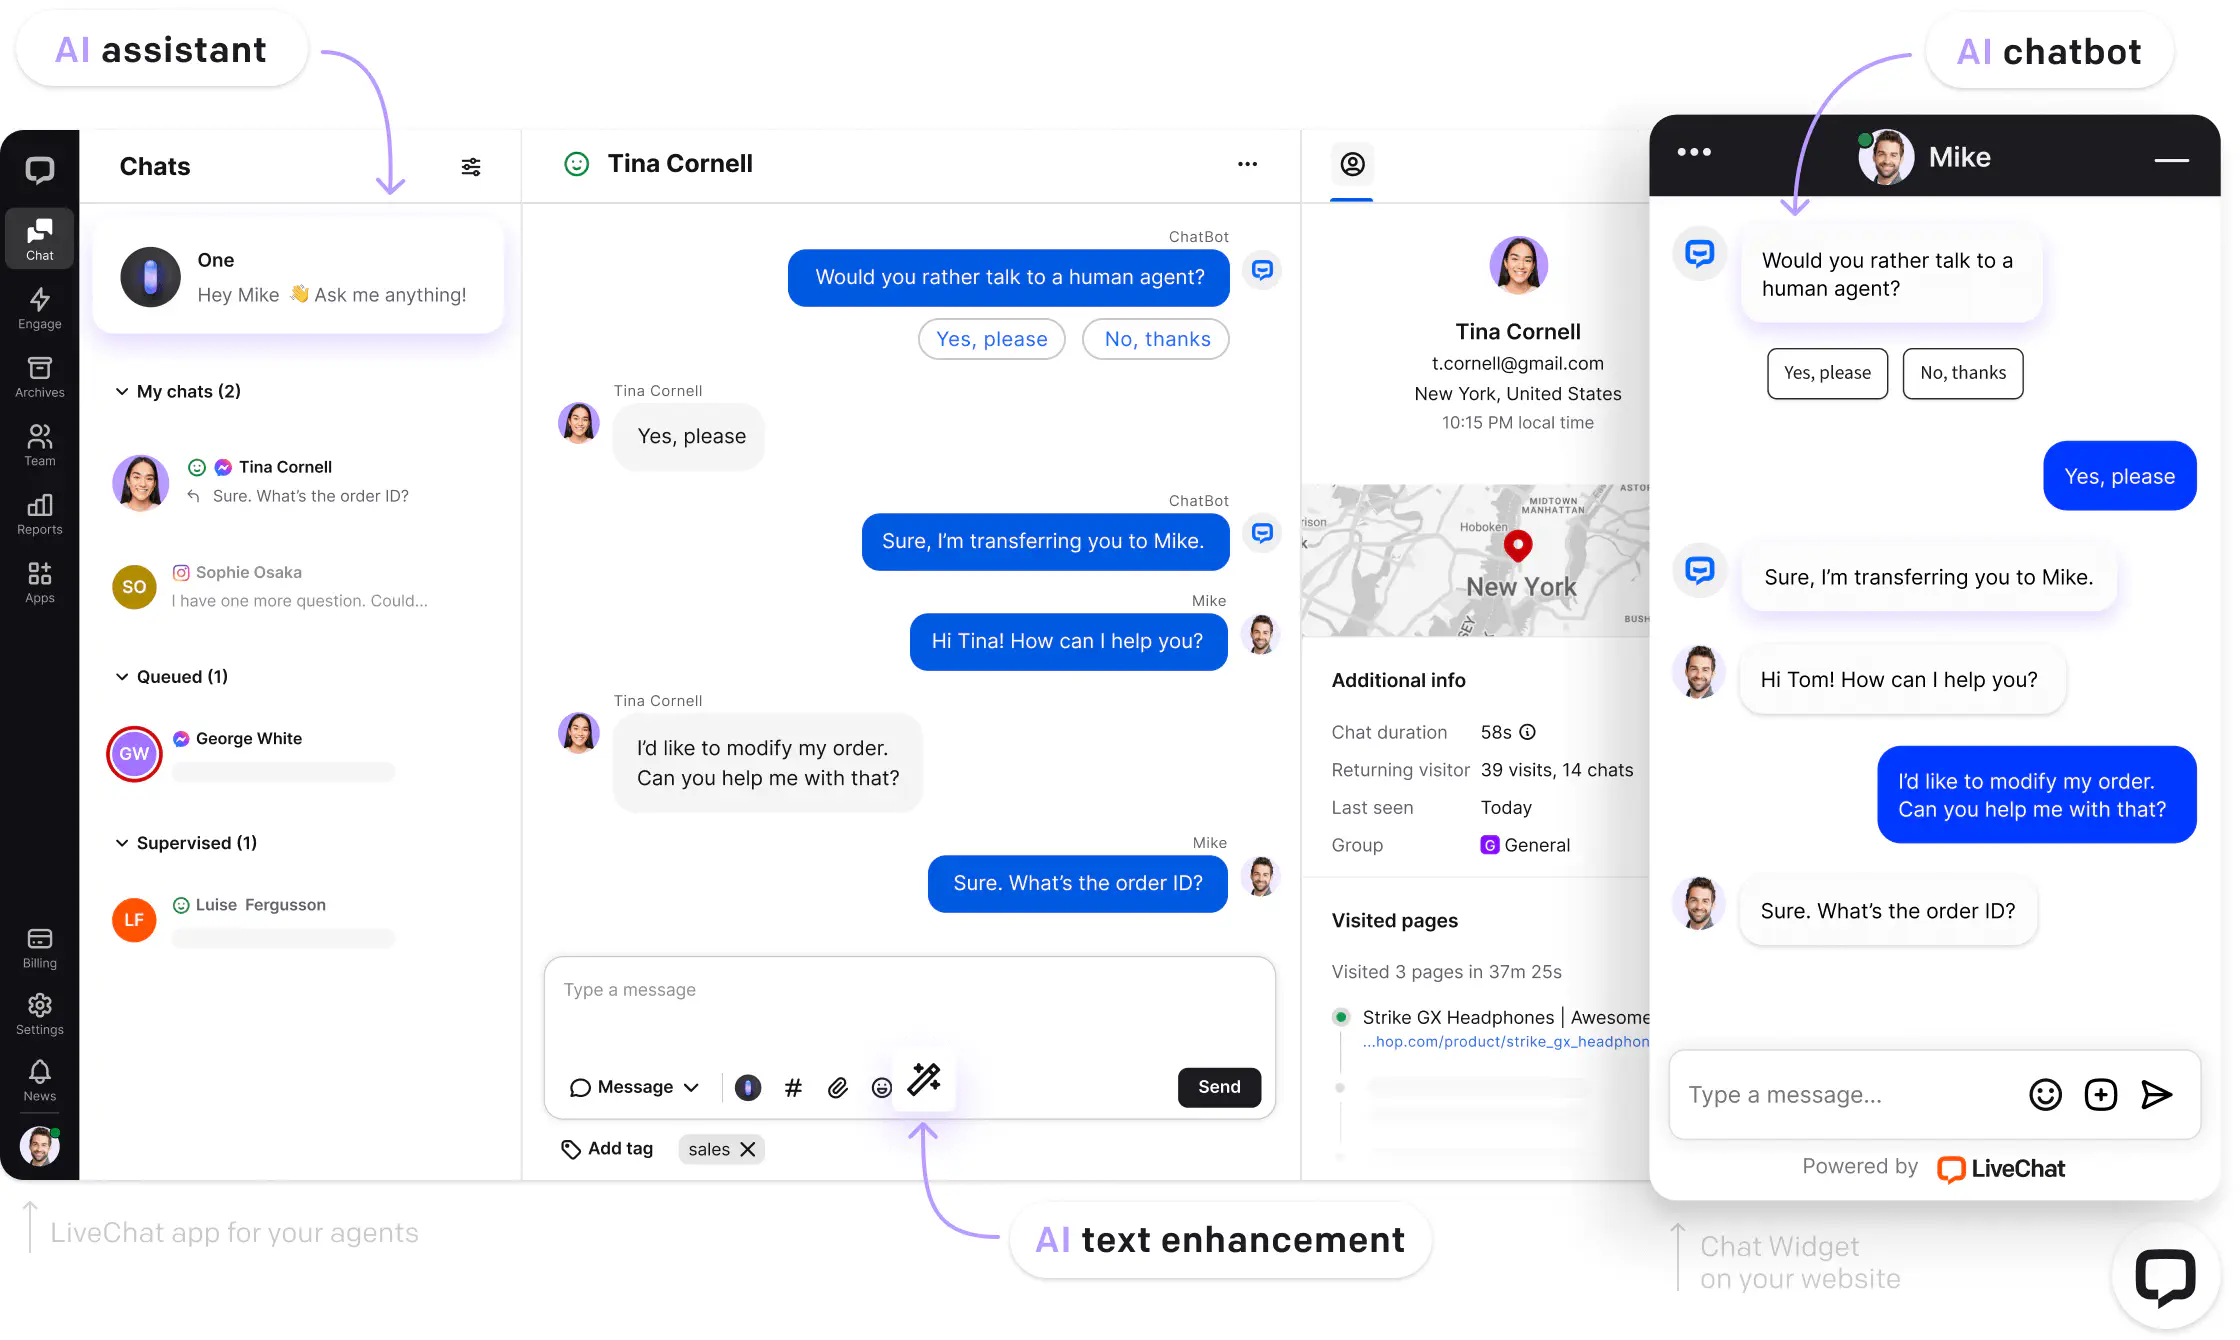 The chat tab within the Live Chat app allows access to One, an AI assistant that enhances work effectiveness, and to chats with customers handled by AI chatbots.